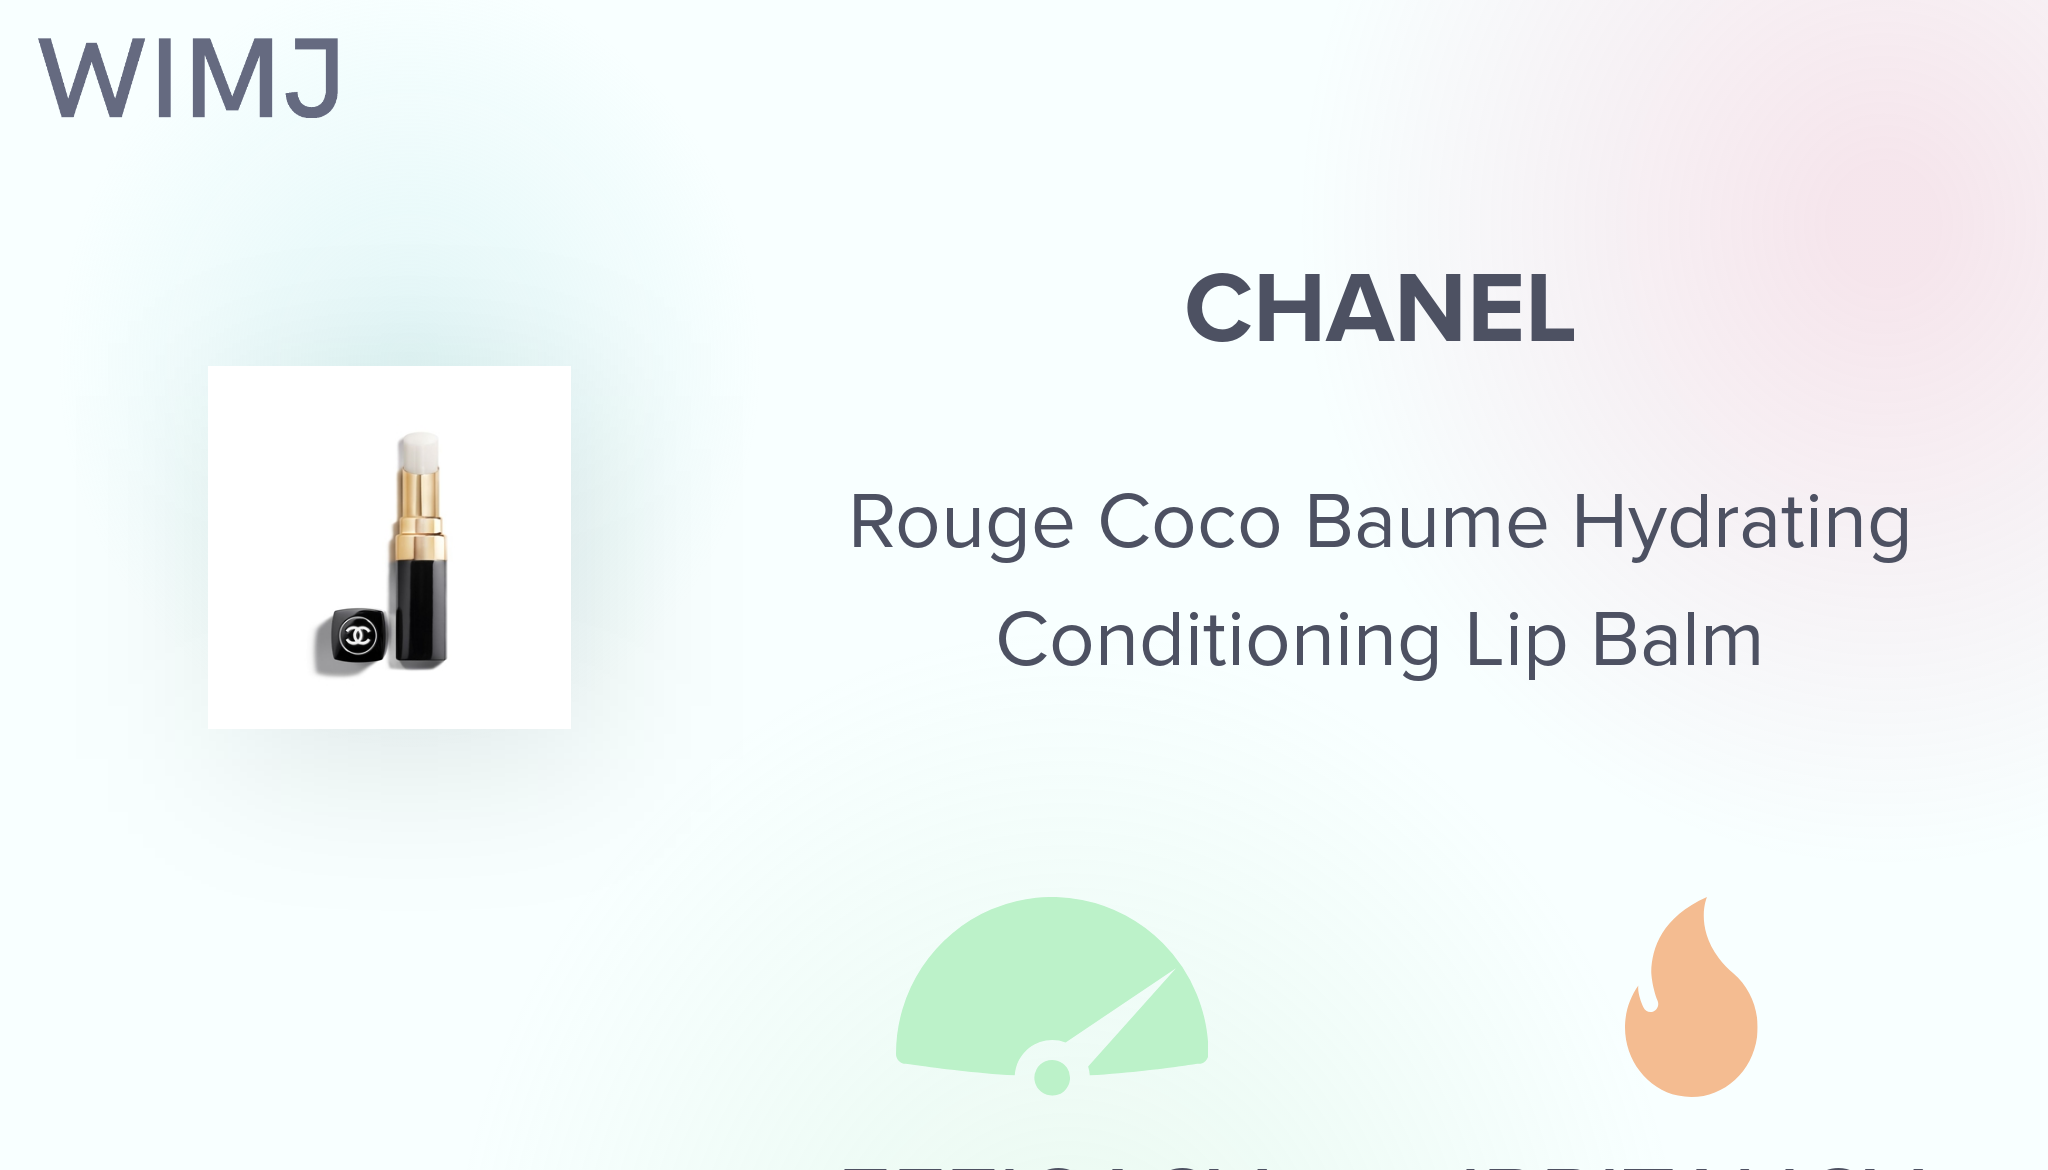 Review: CHANEL - Rouge Coco Baume Hydrating Conditioning Lip Balm - WIMJ